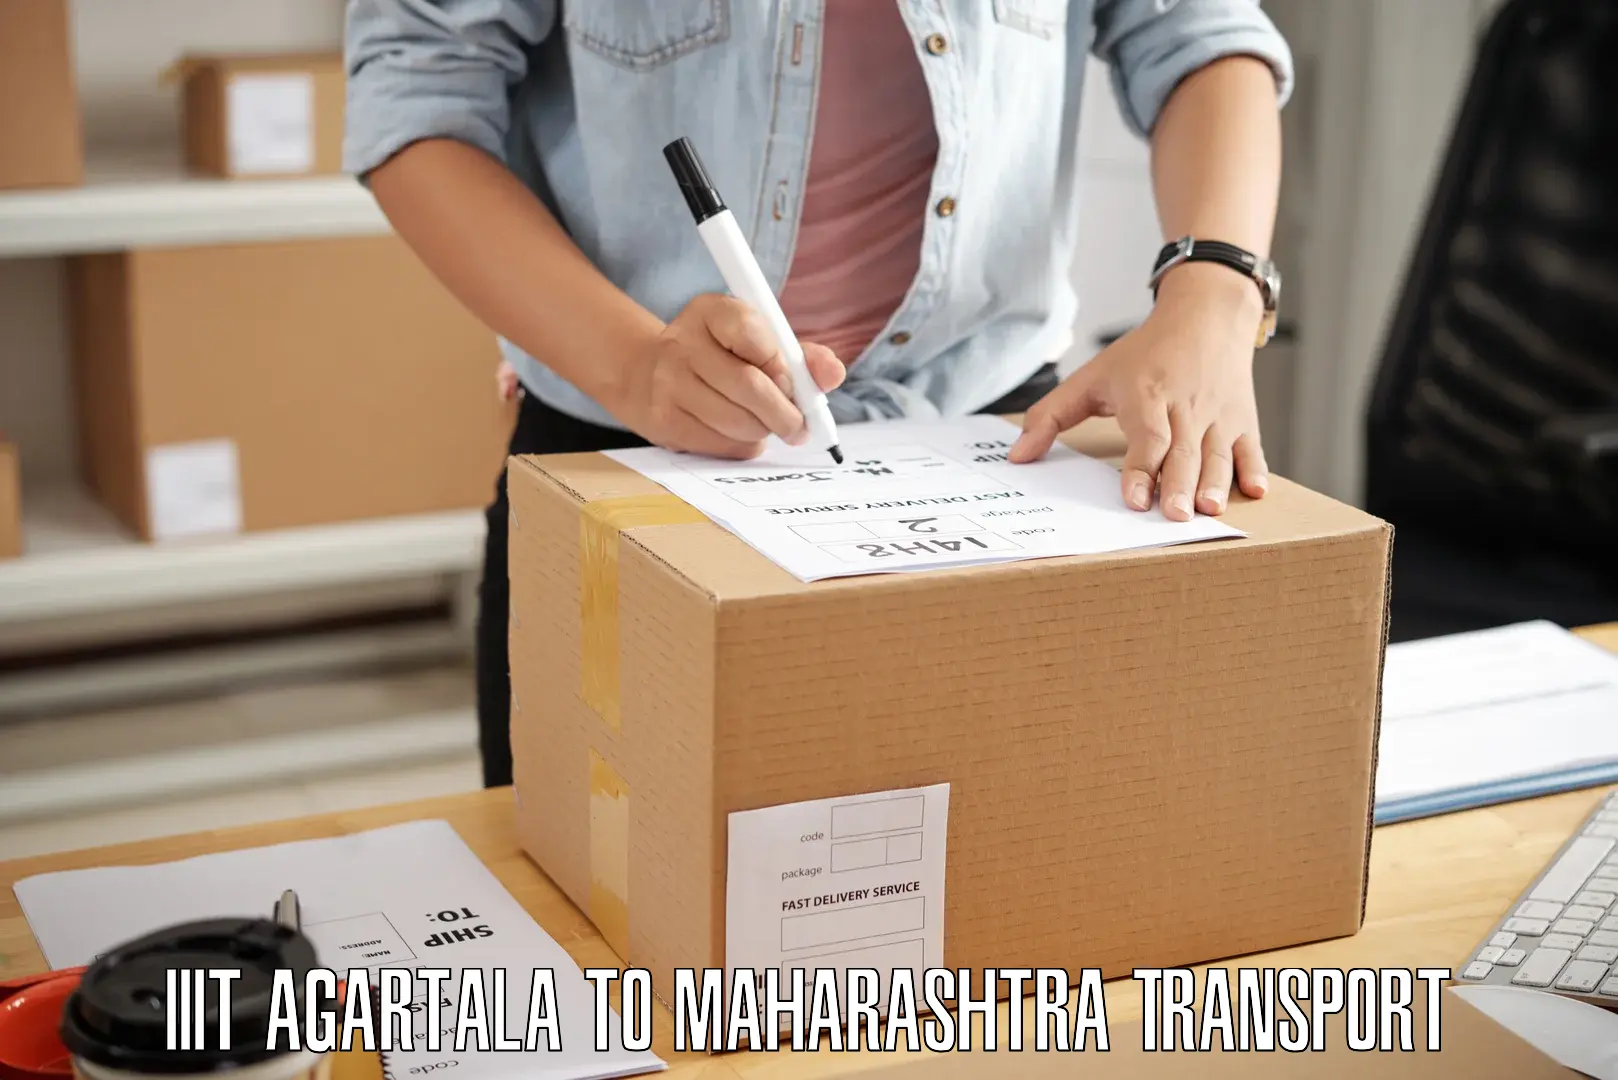 Domestic goods transportation services IIIT Agartala to Dharmabad